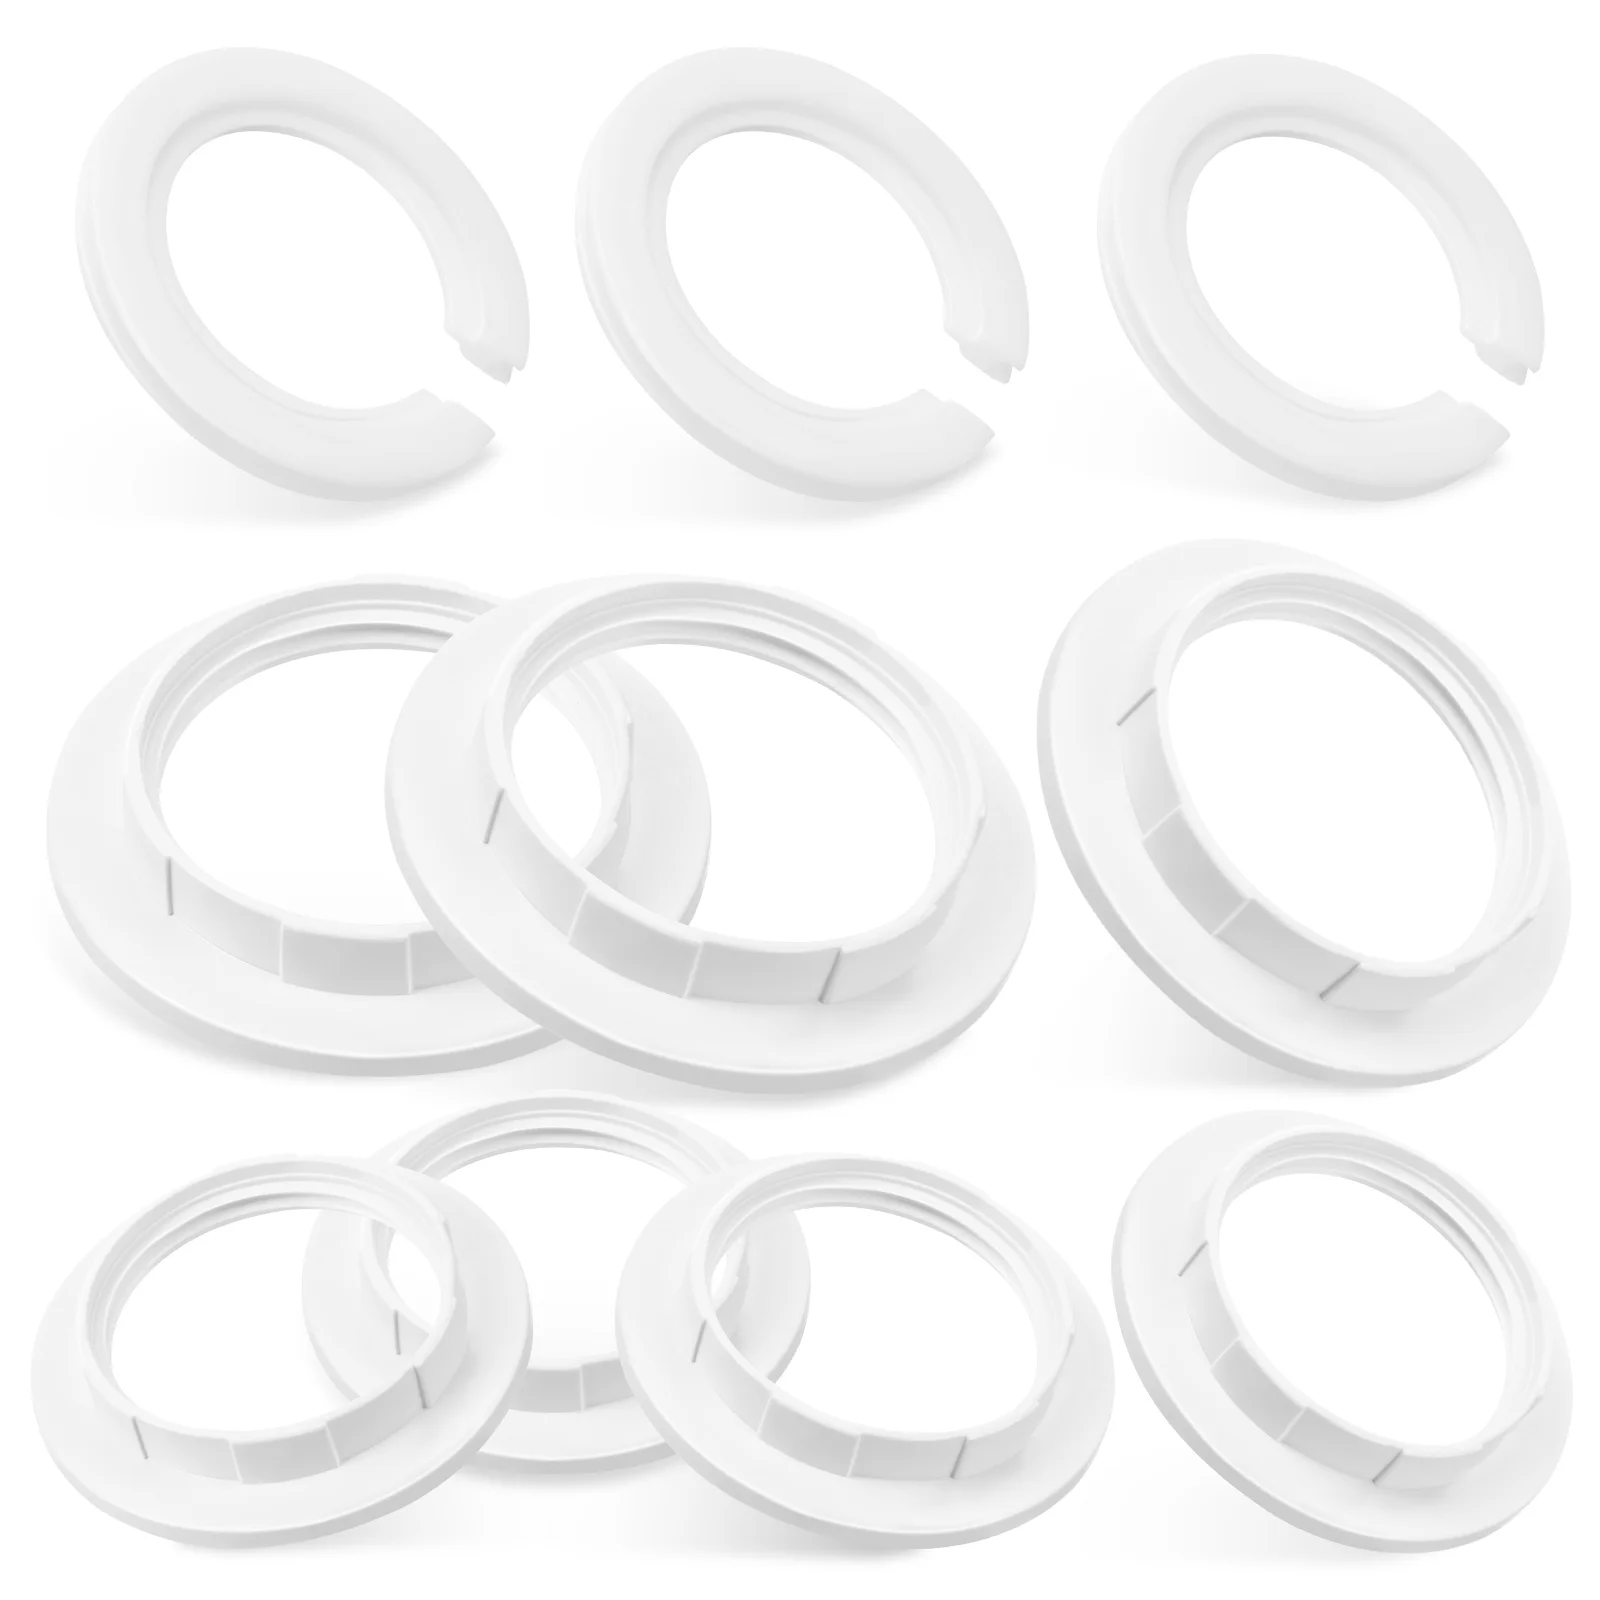 15 Pcs Bulb Holder Fixing Ring Lampshade Frame Parts for Table Repair Light Fixture Component